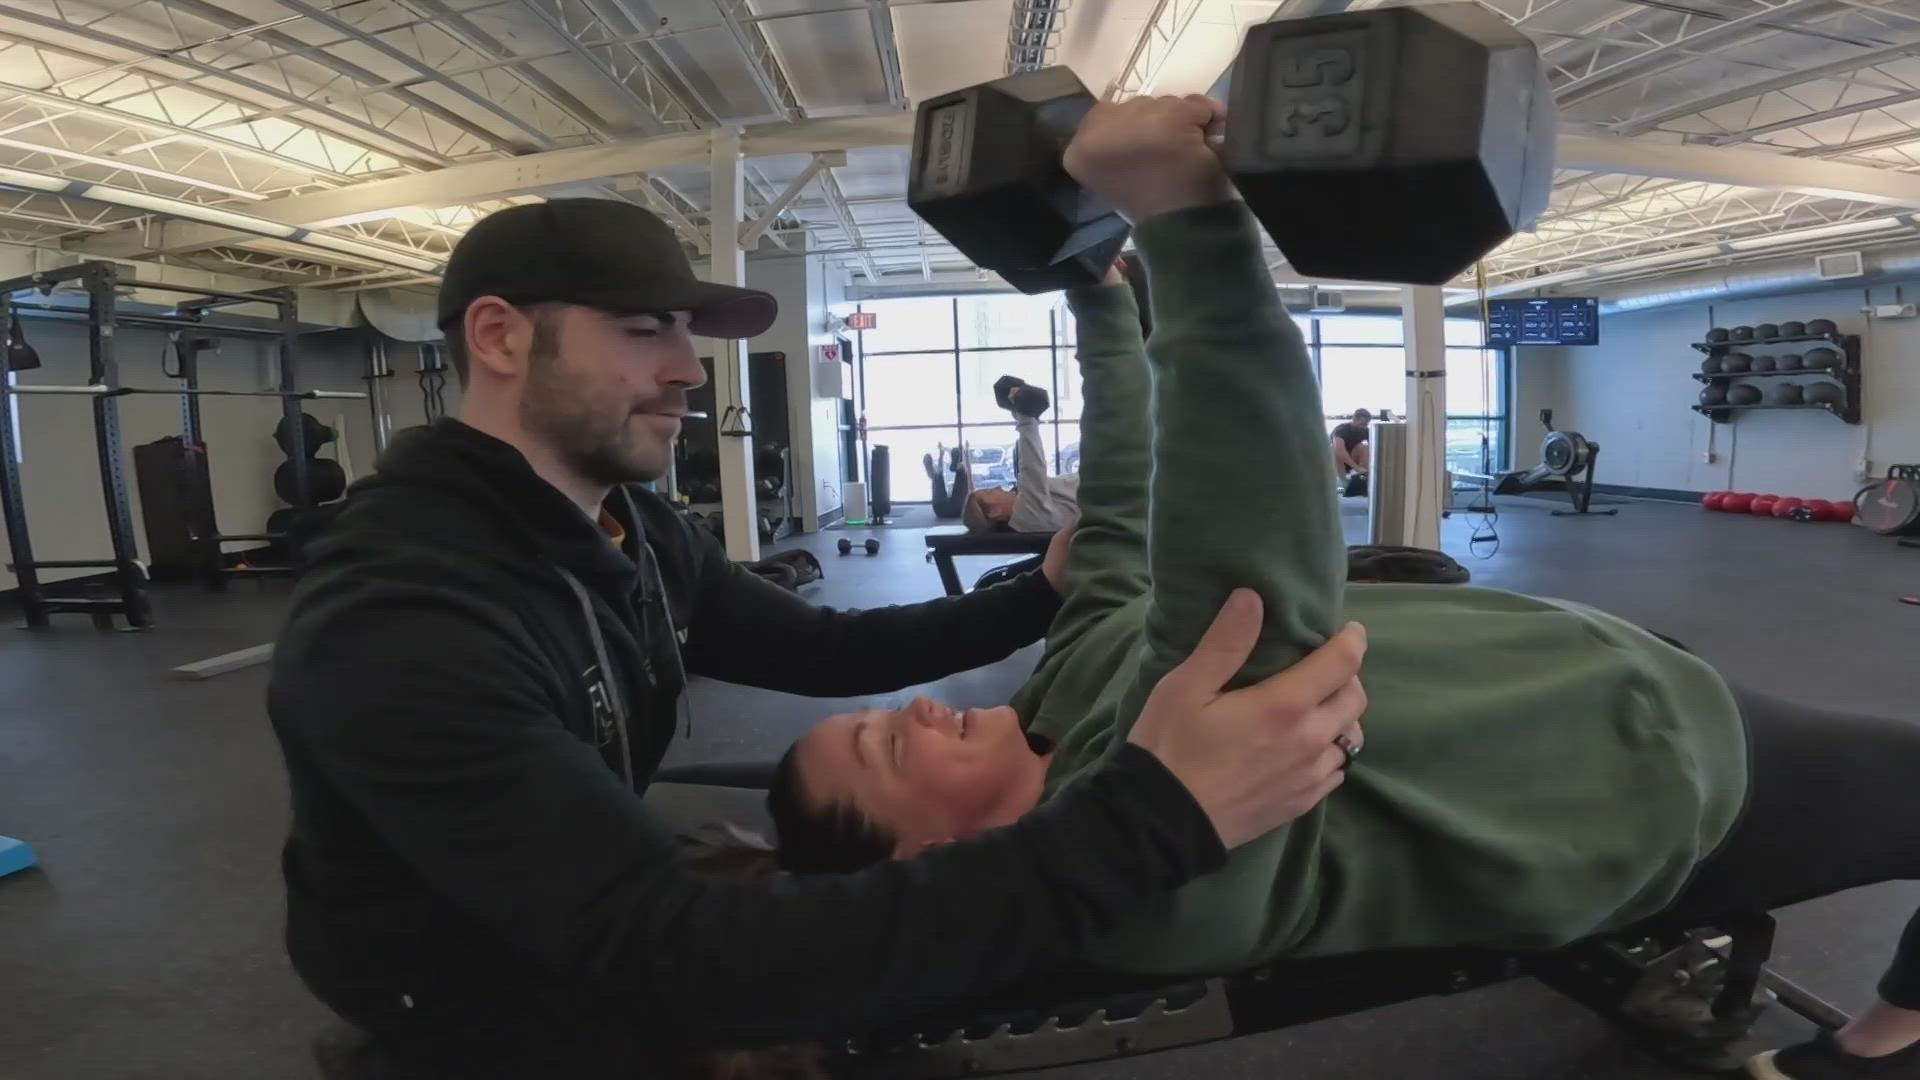 The Portland gym hopes to create a better experience for both clients & employees